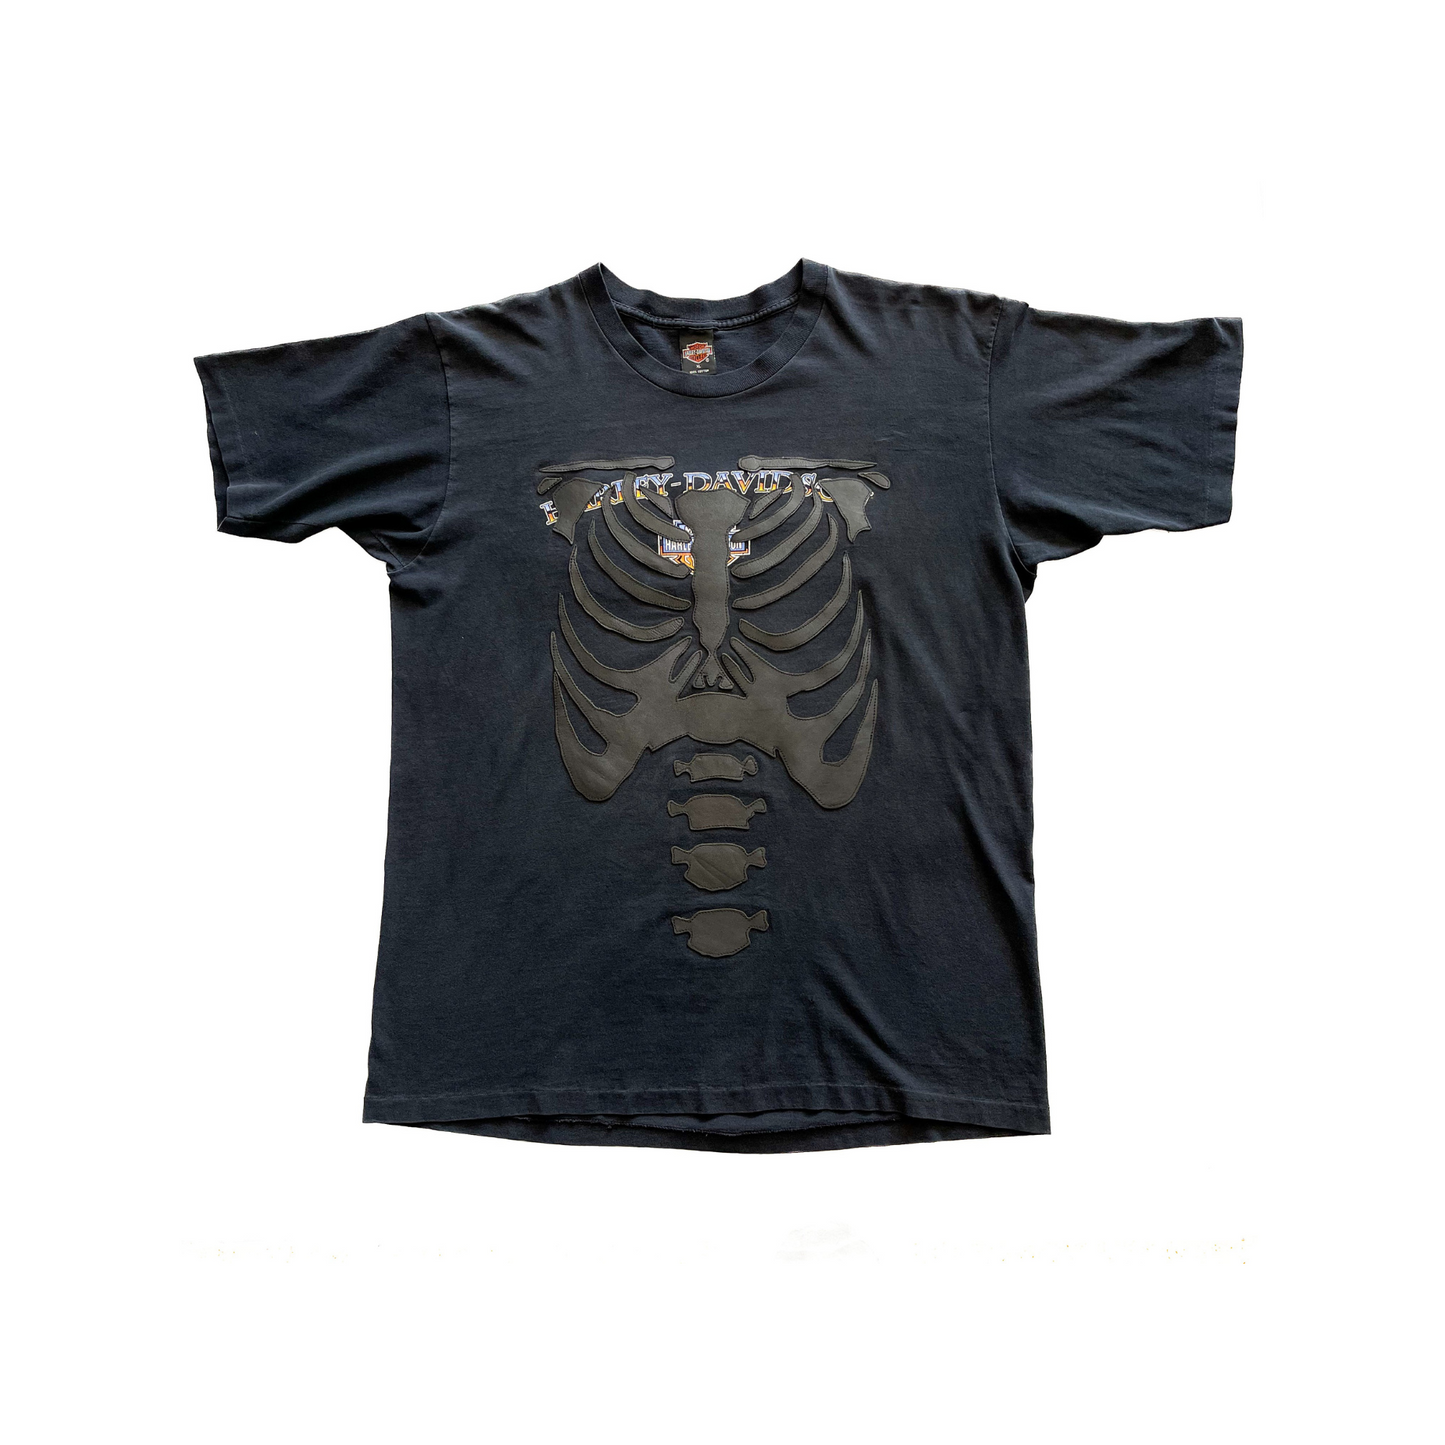 Harley Davidson Kentucky T-shirt with Leather Ribcage Appliqué